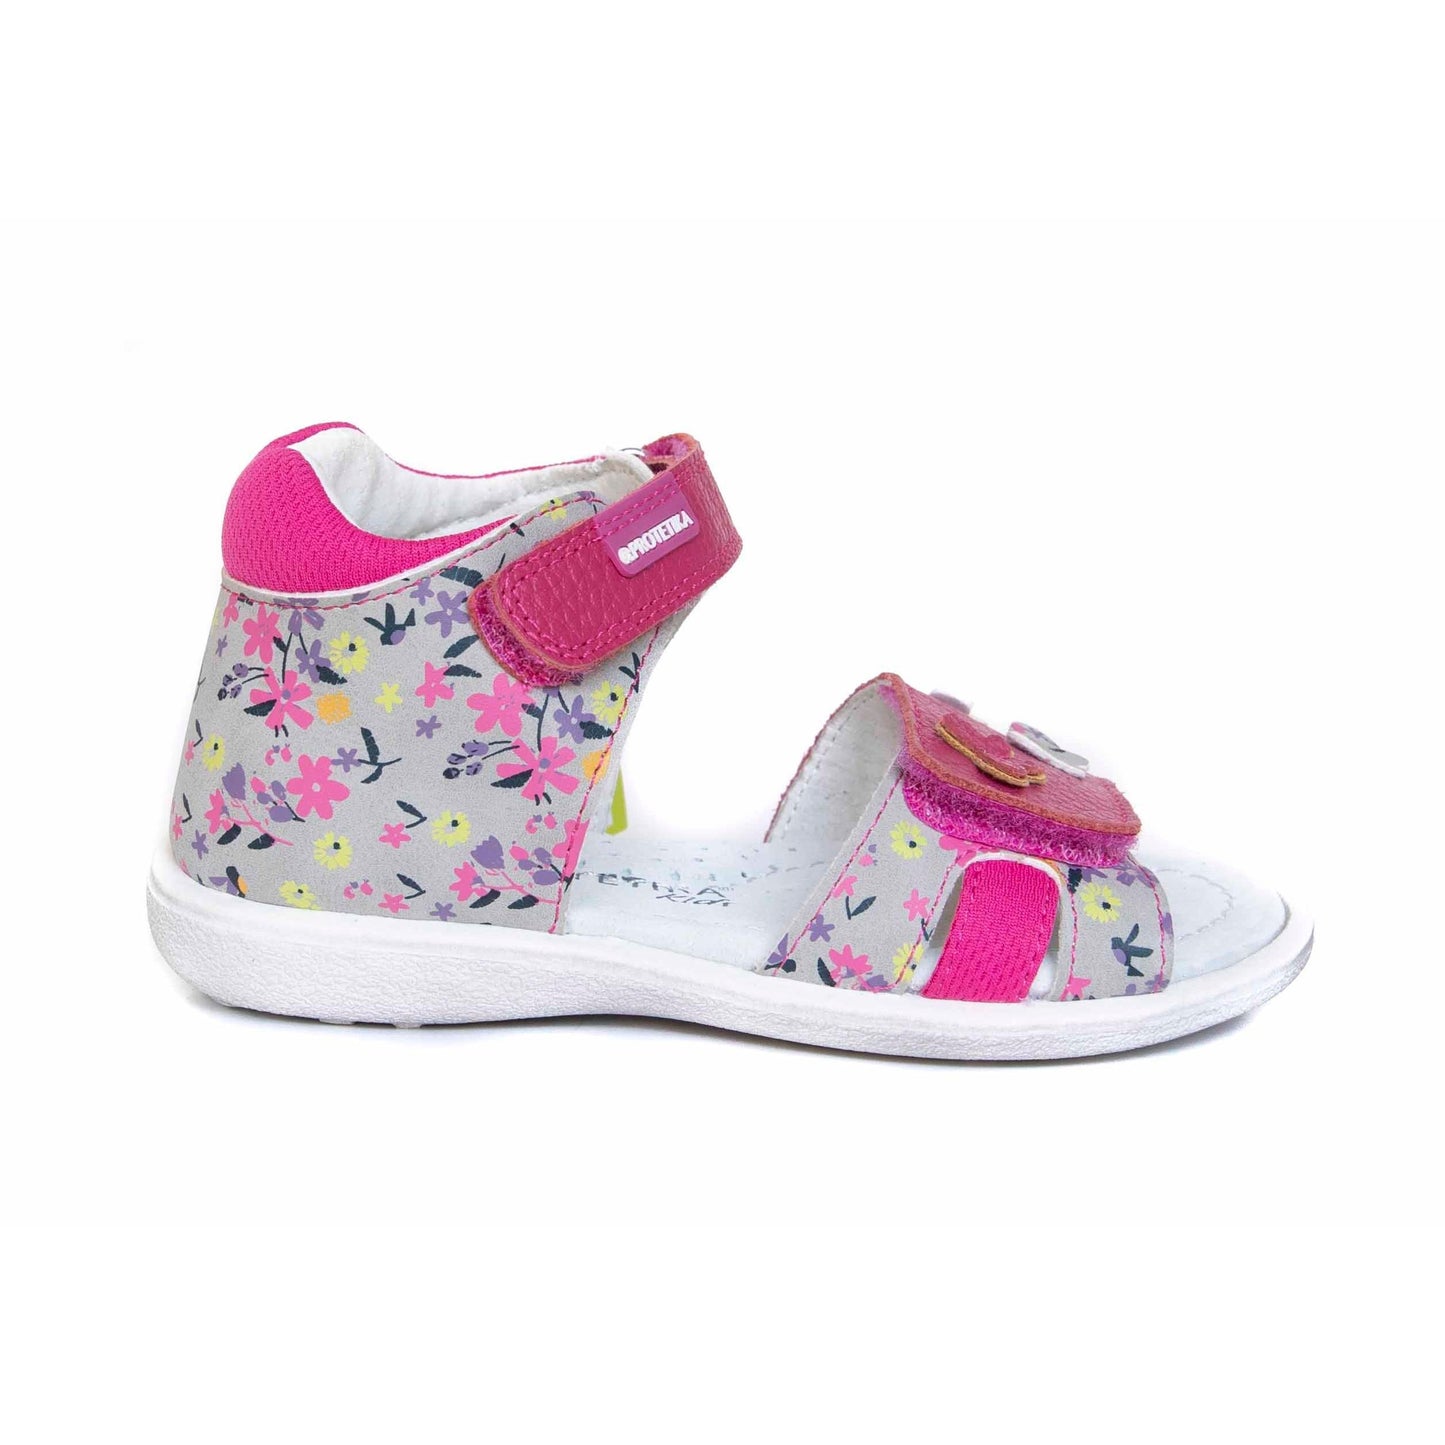 Toddler girl arch support sandals are the last piece remaining in size EU 23, shoe inside length 15 cm.